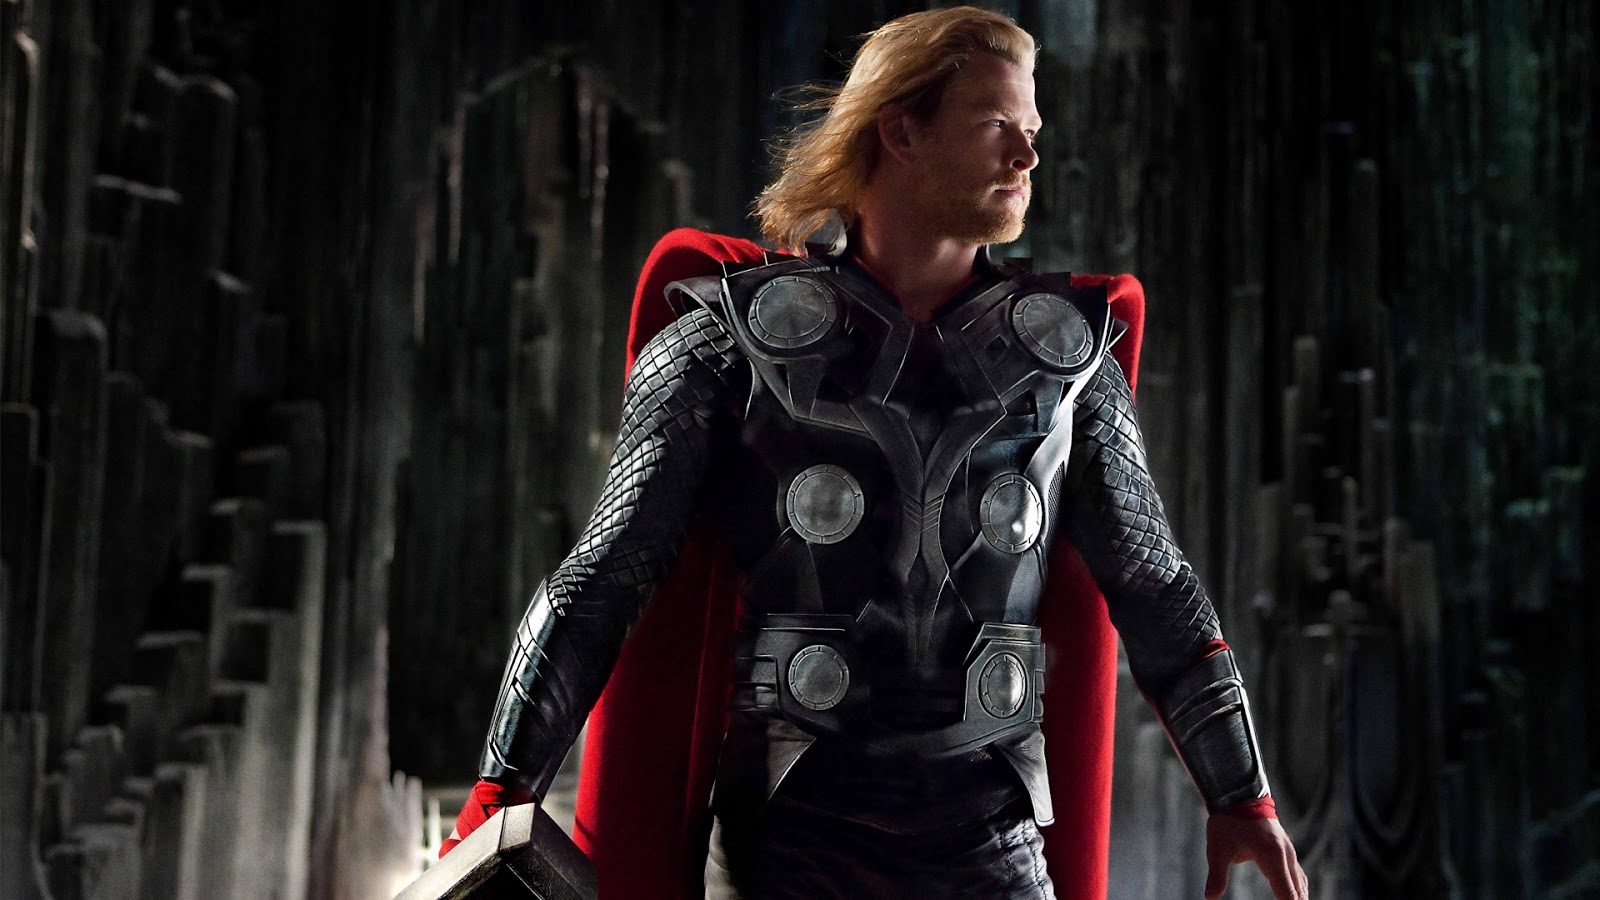 Thor 2 The Dark World HD Wallpapers | HD Wallpapers (High ...